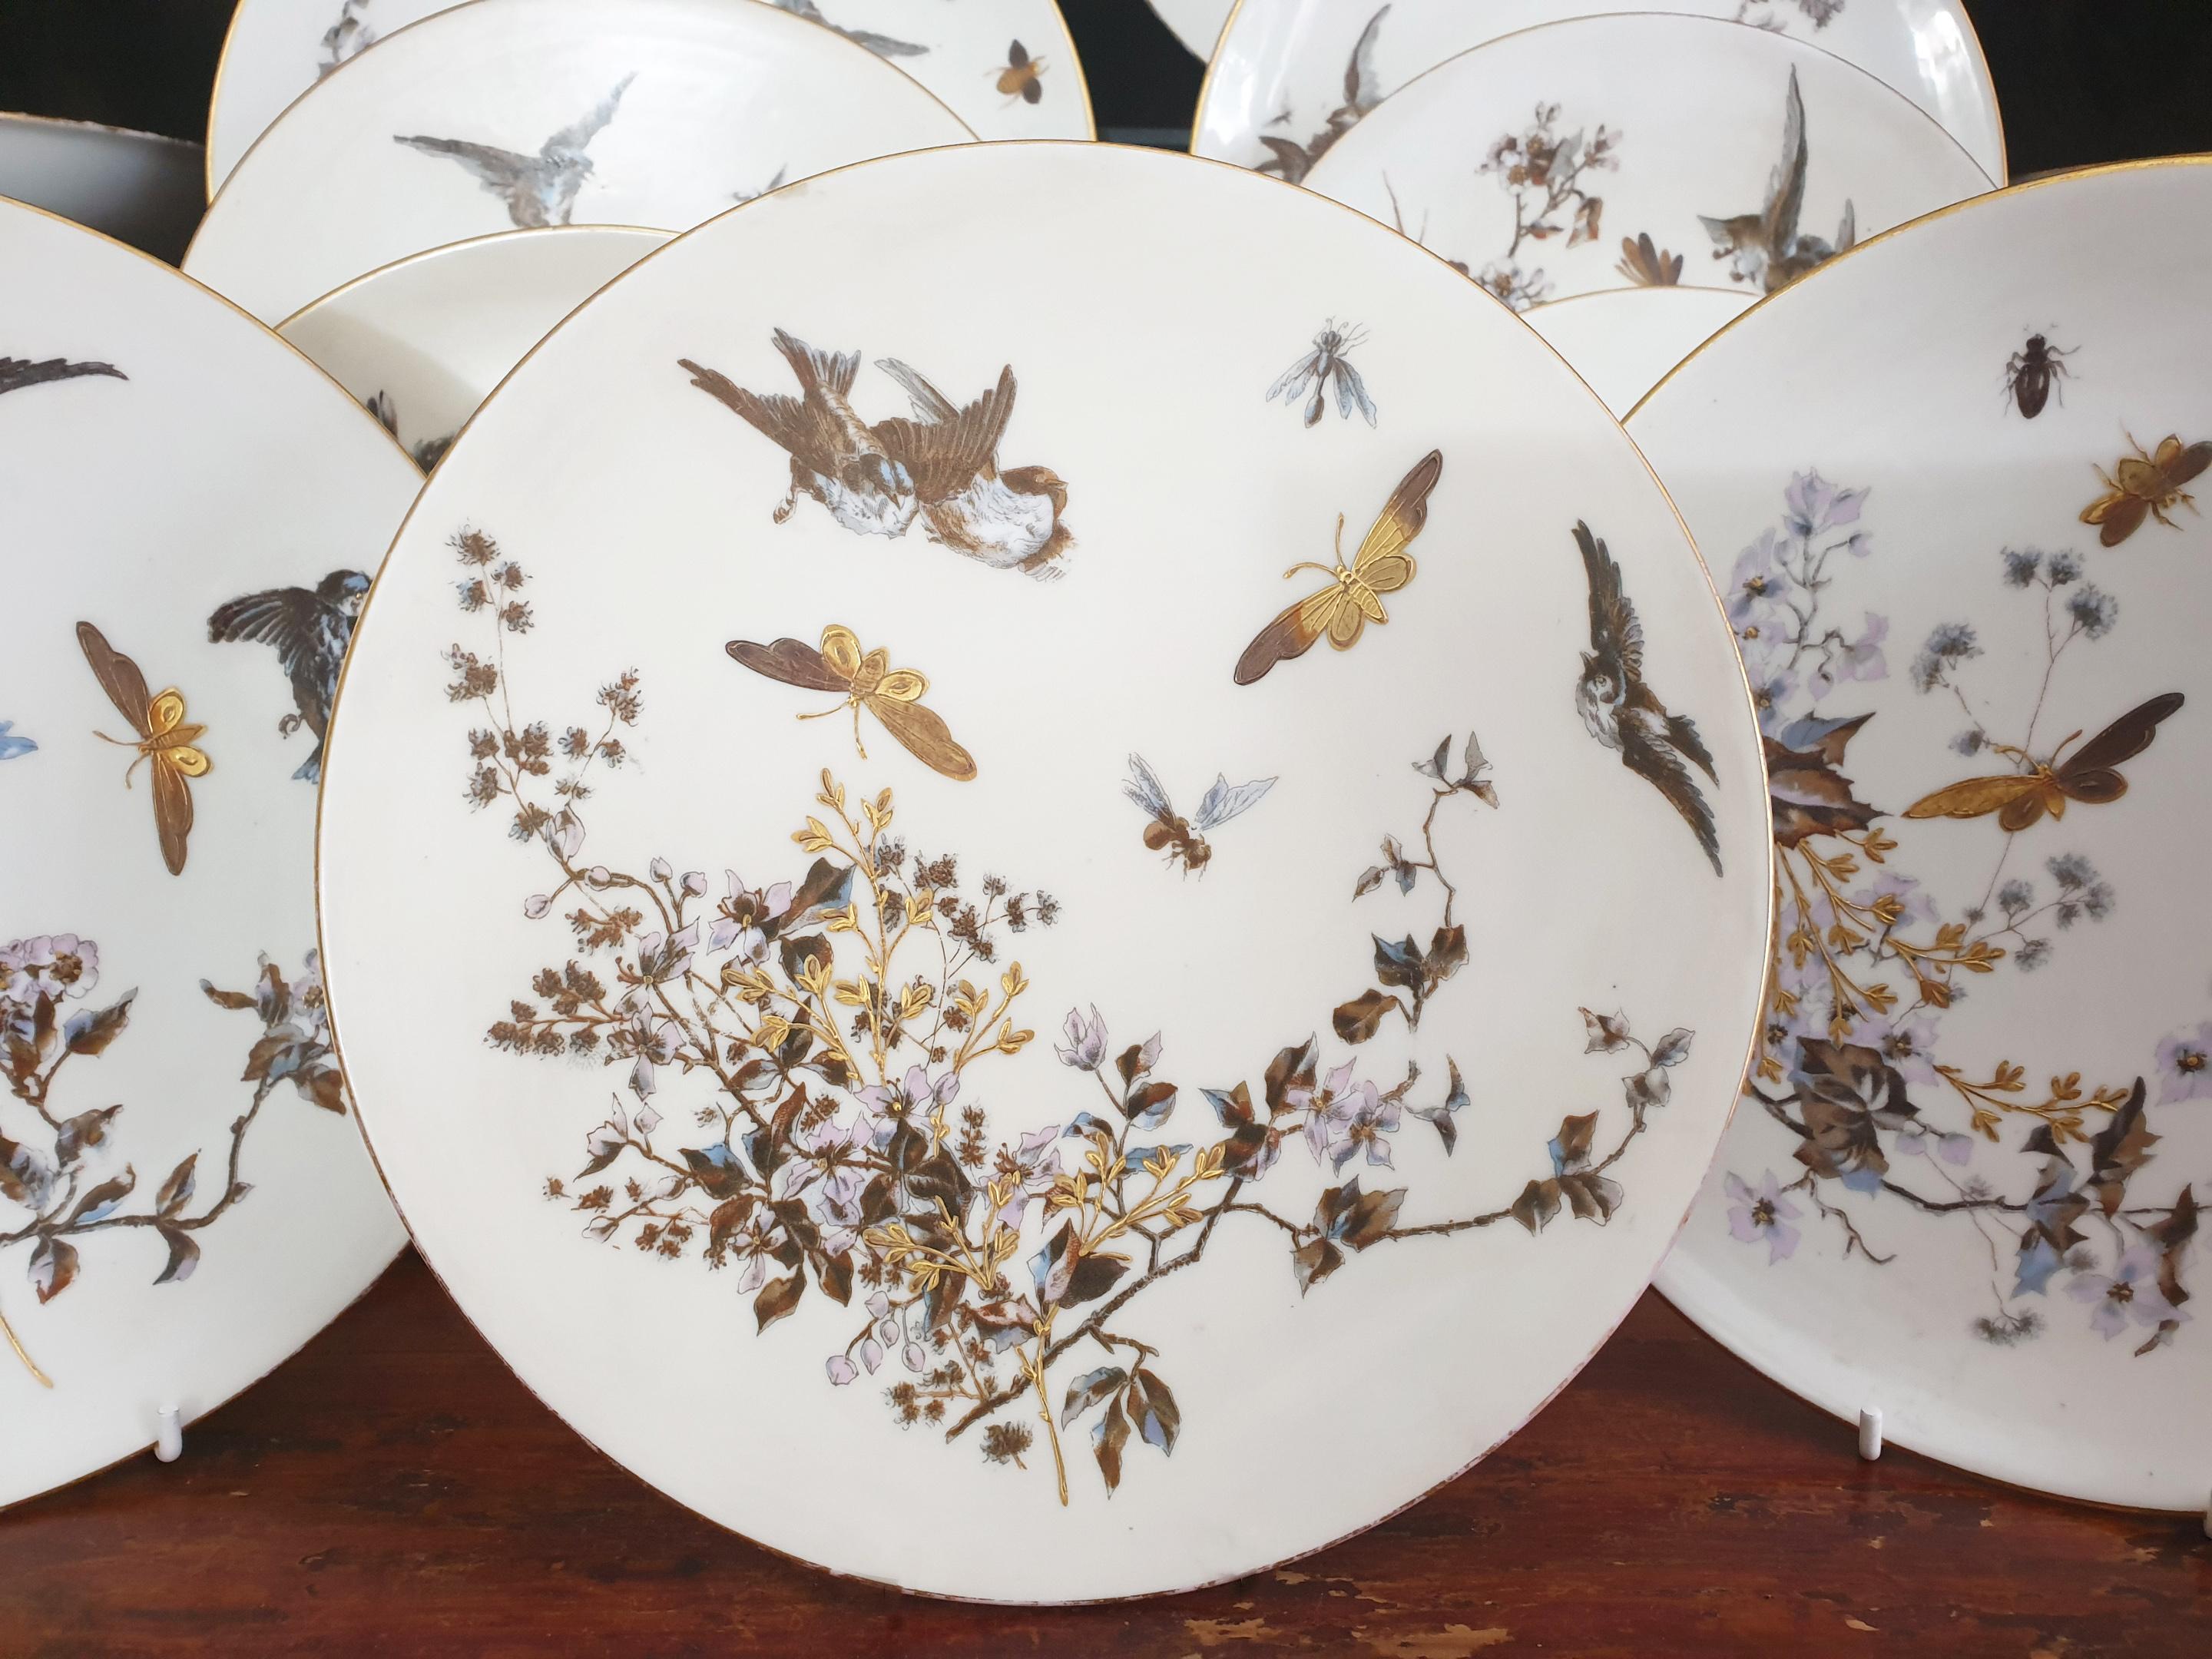 A Pirkenhammer porcelain dessert hand painted Service service for 12 persons. This amazing set consist of 12 plates and 3 comports, a total of 15 pieces.
All handpainted in the Aesthetic Movement style with butterflies, dragonflies, birds, bees,